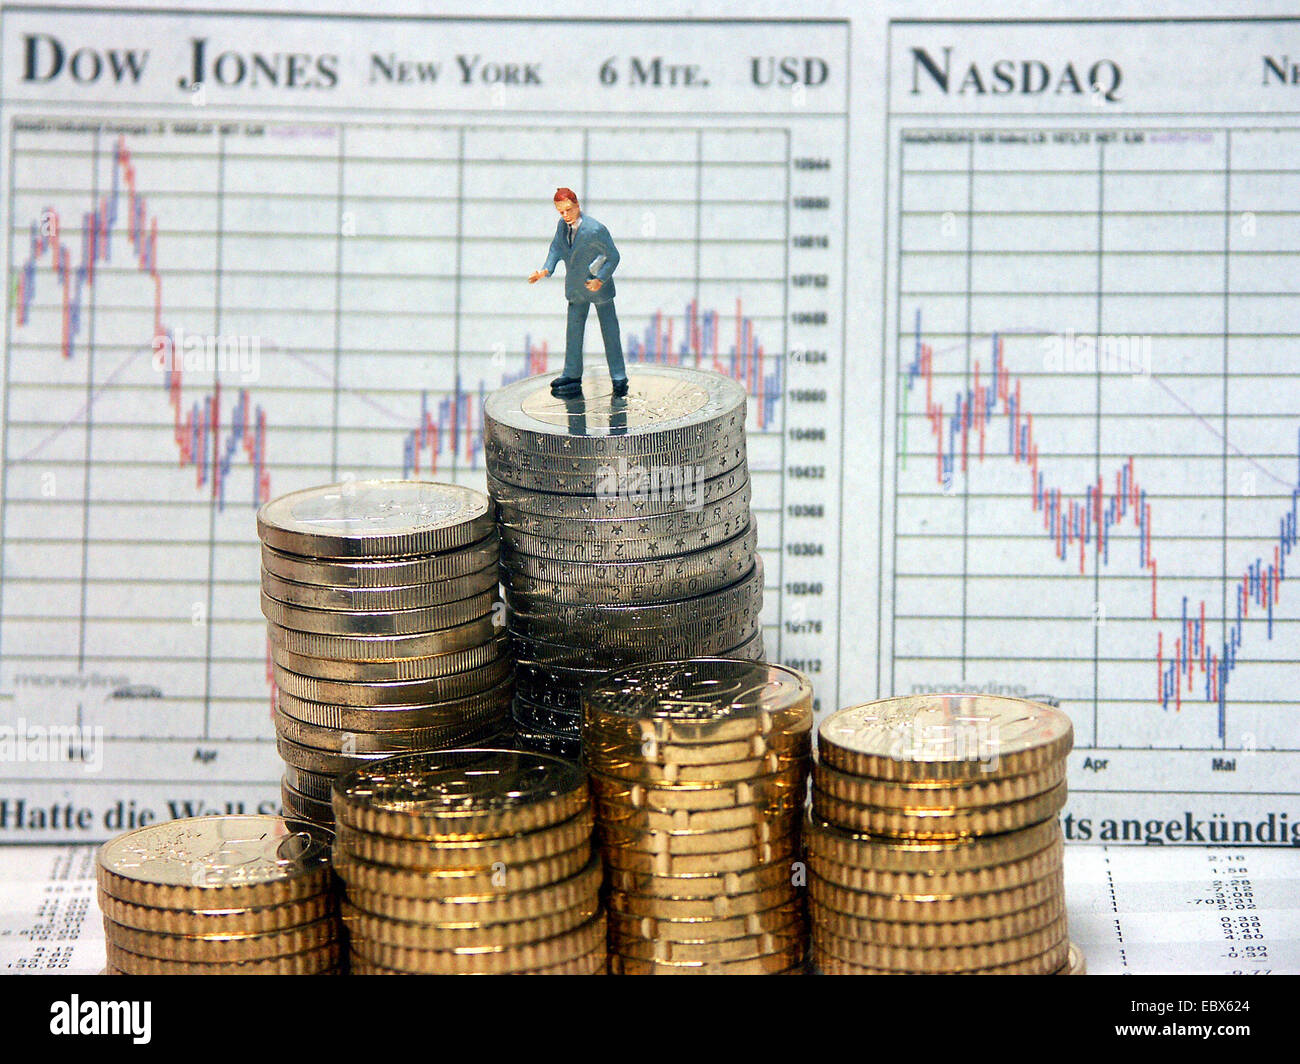 Symbolphoto share price, little figure at coins Stock Photo